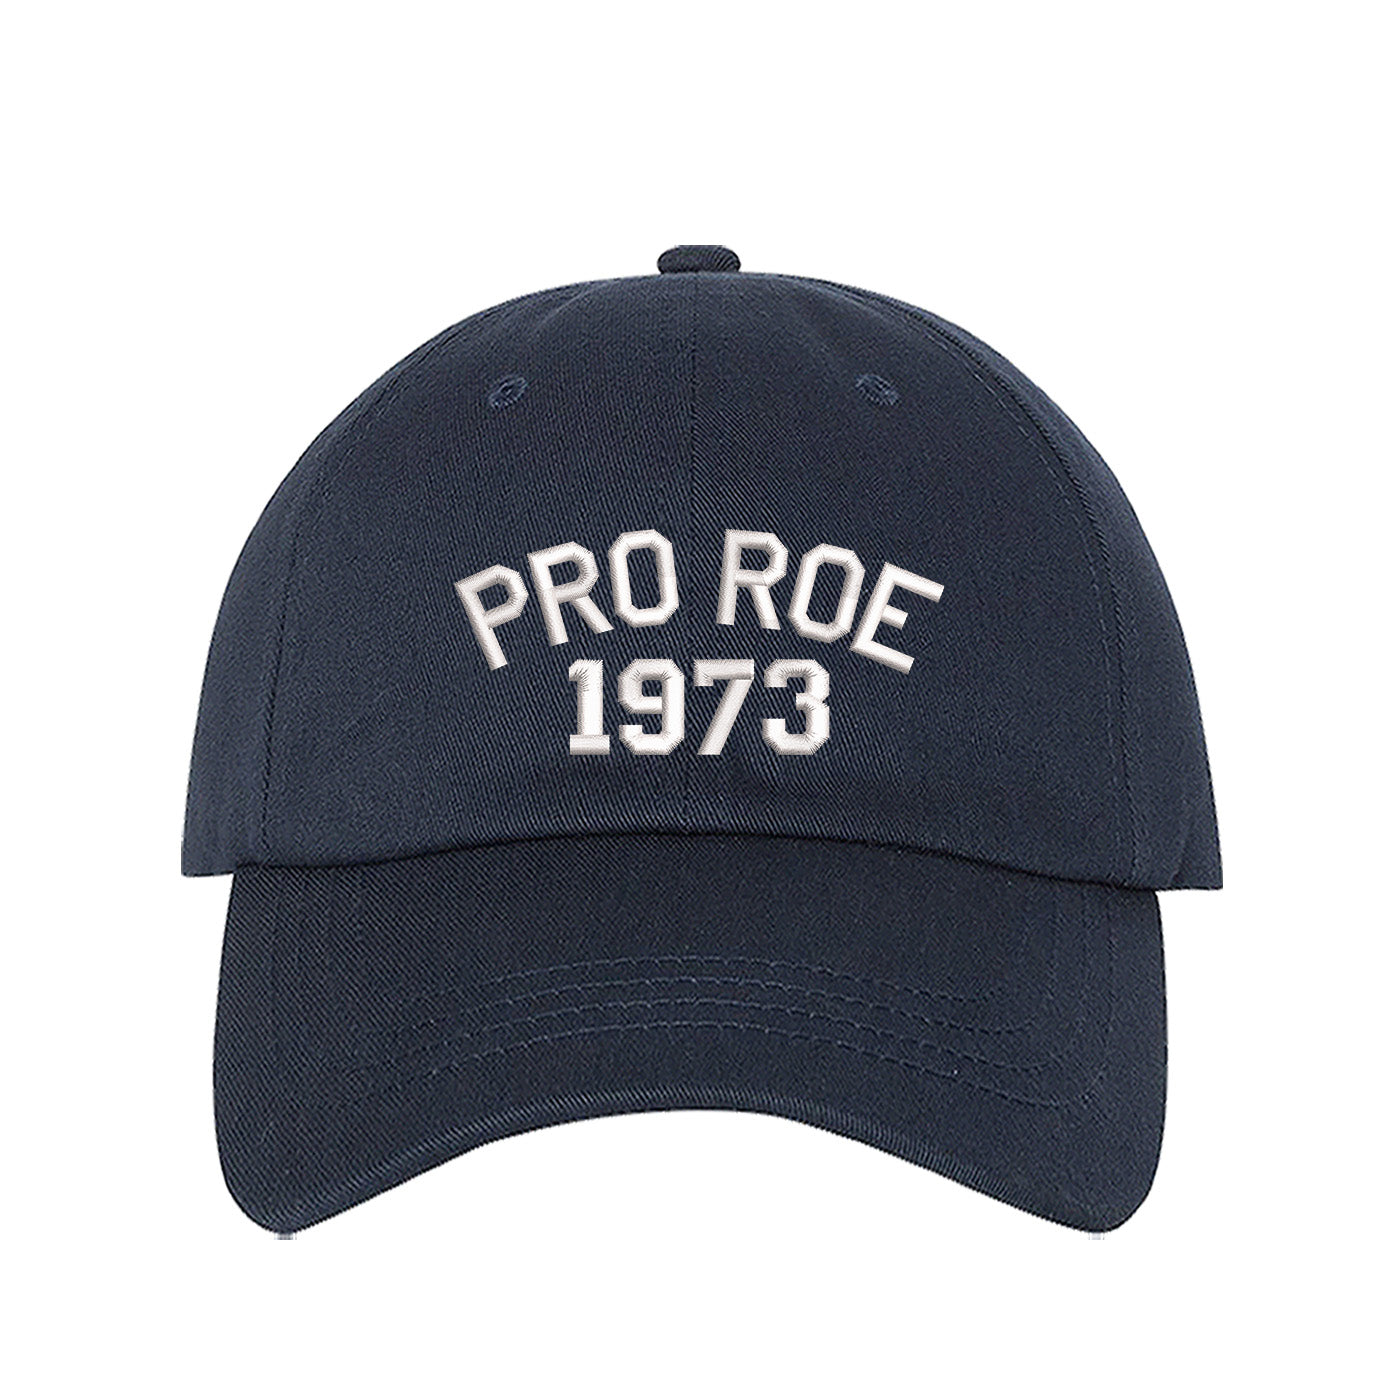 Pro Roe 1973 Navy Embroidered Baseball Cap - DSY Lifesetyle